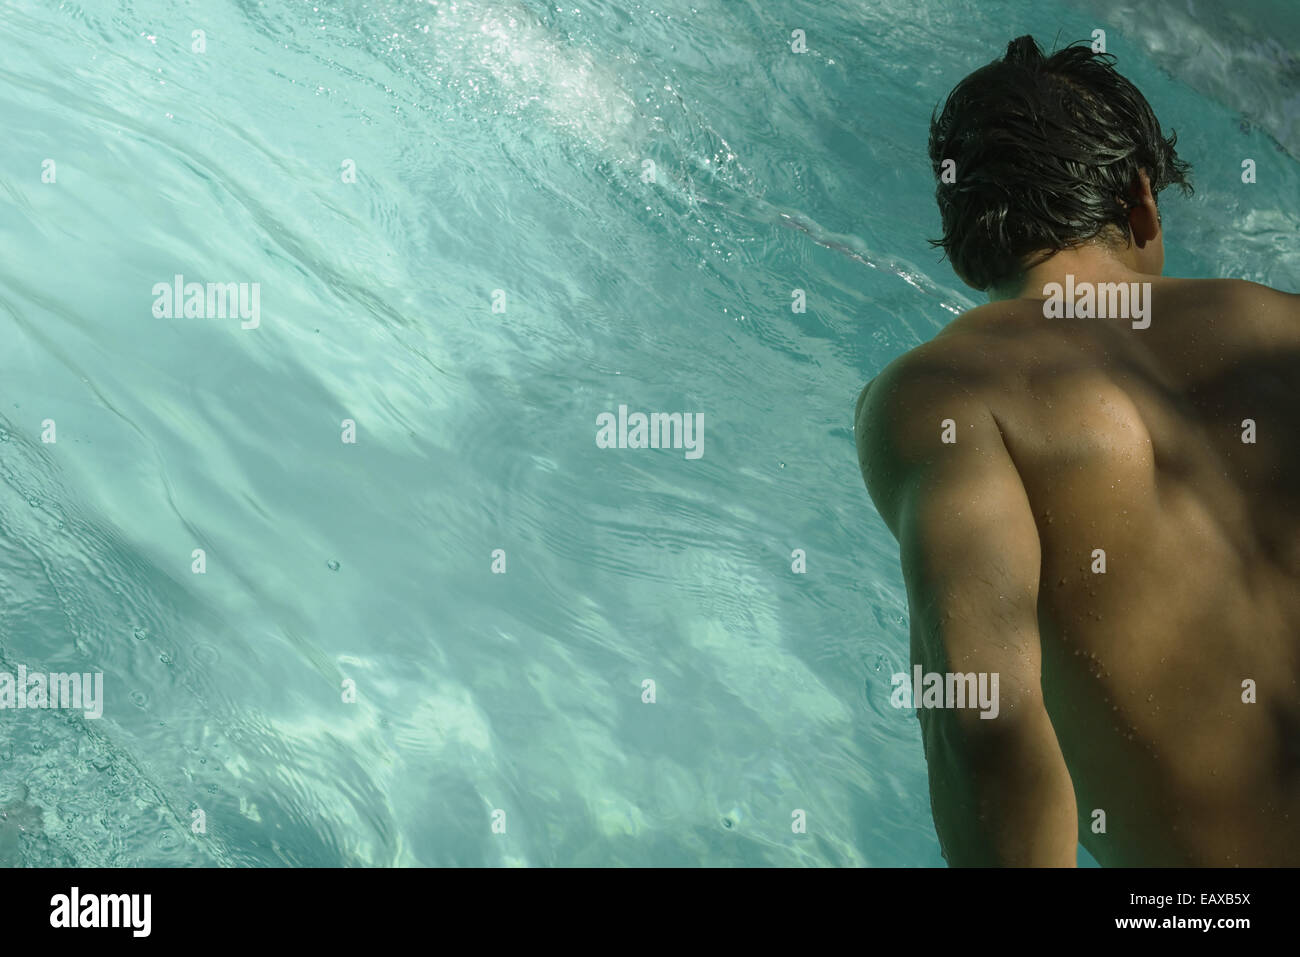 Man leaning over pool, rear view Stock Photo